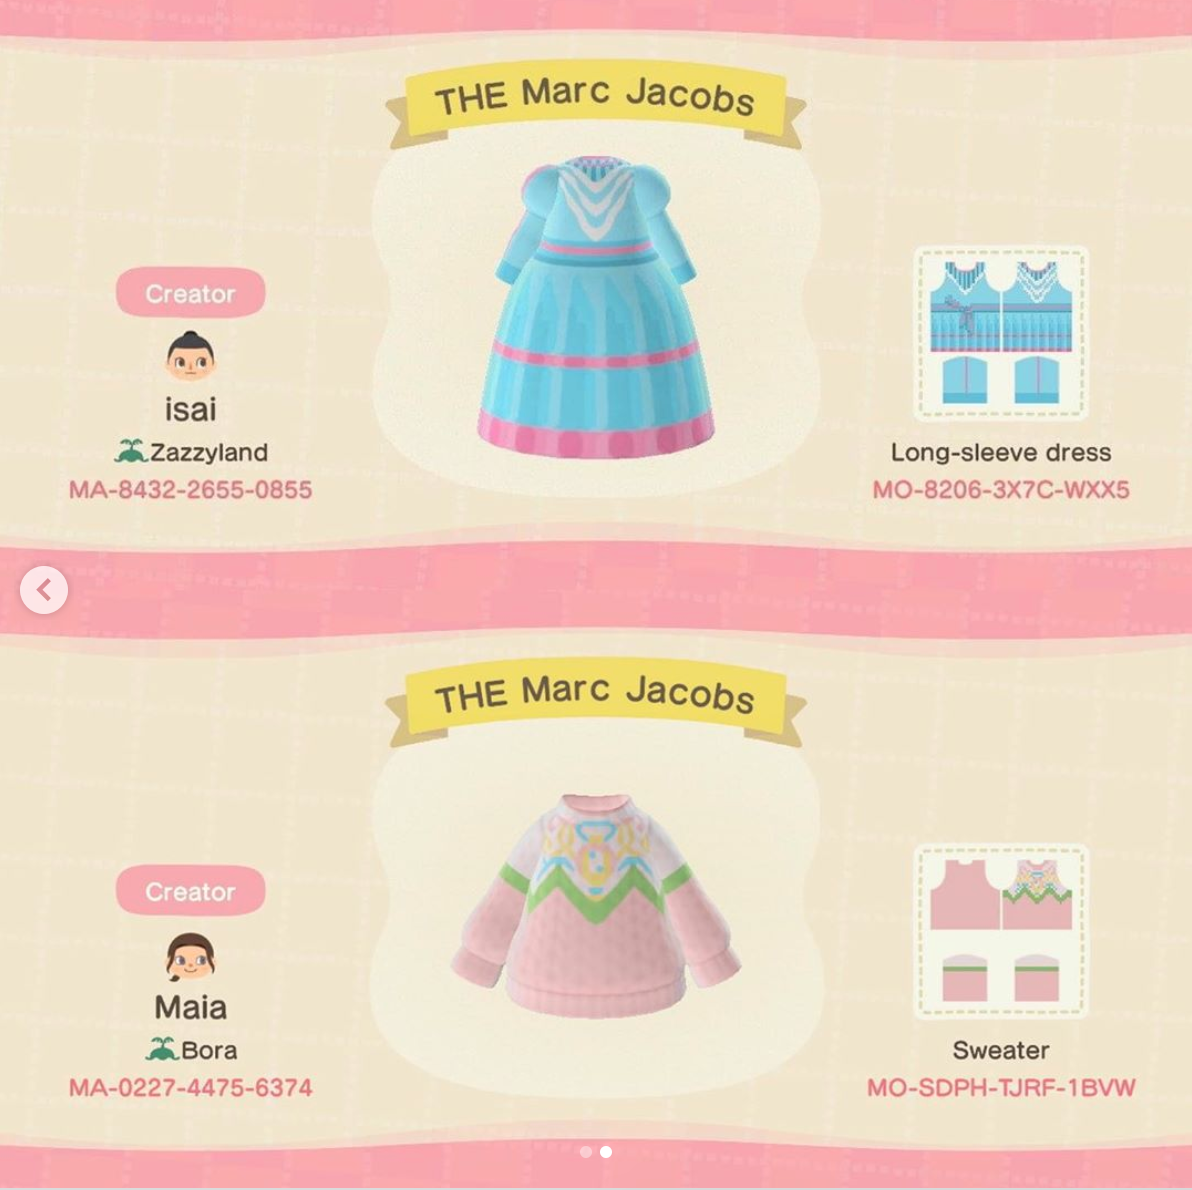 dumb video game brand collaborations - marc jacobs animal crossing new horizons